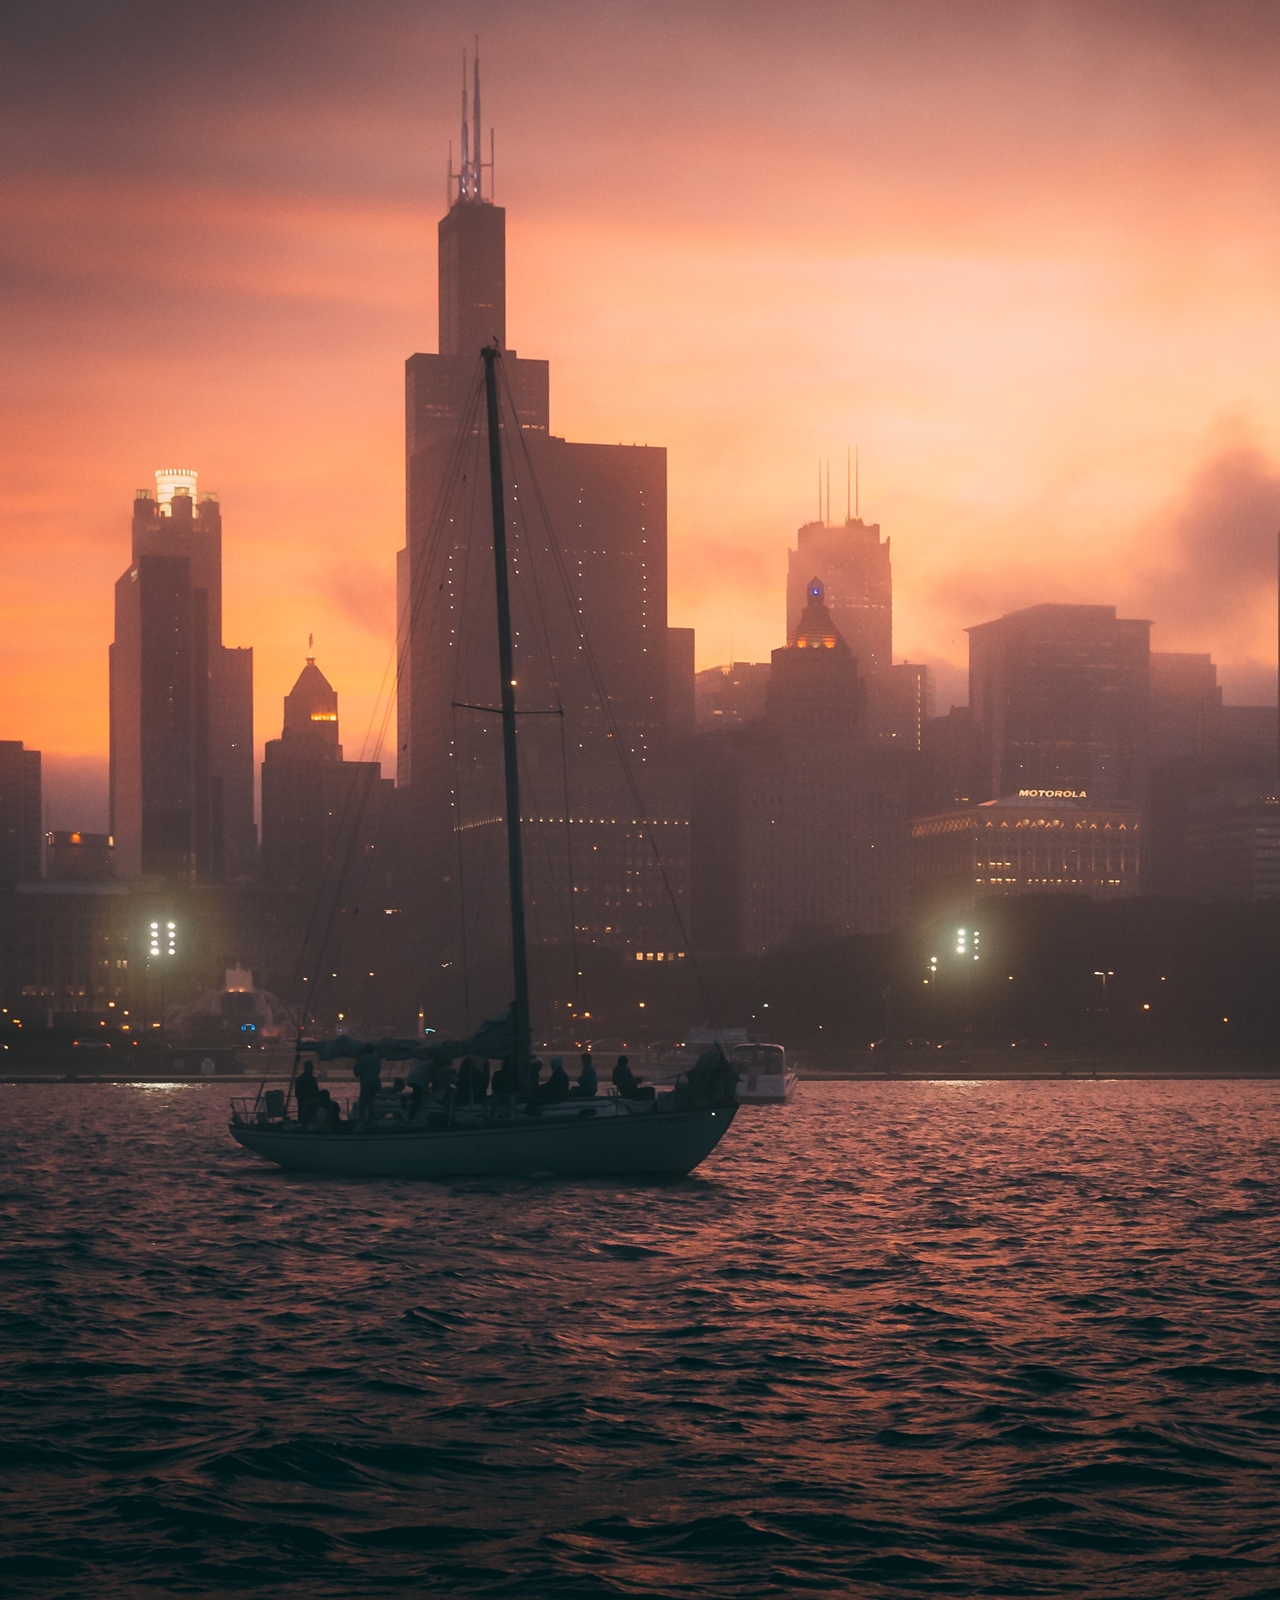 Mesmerizing view of the boat in the ocean and the silhouettes of high buildings during sunset